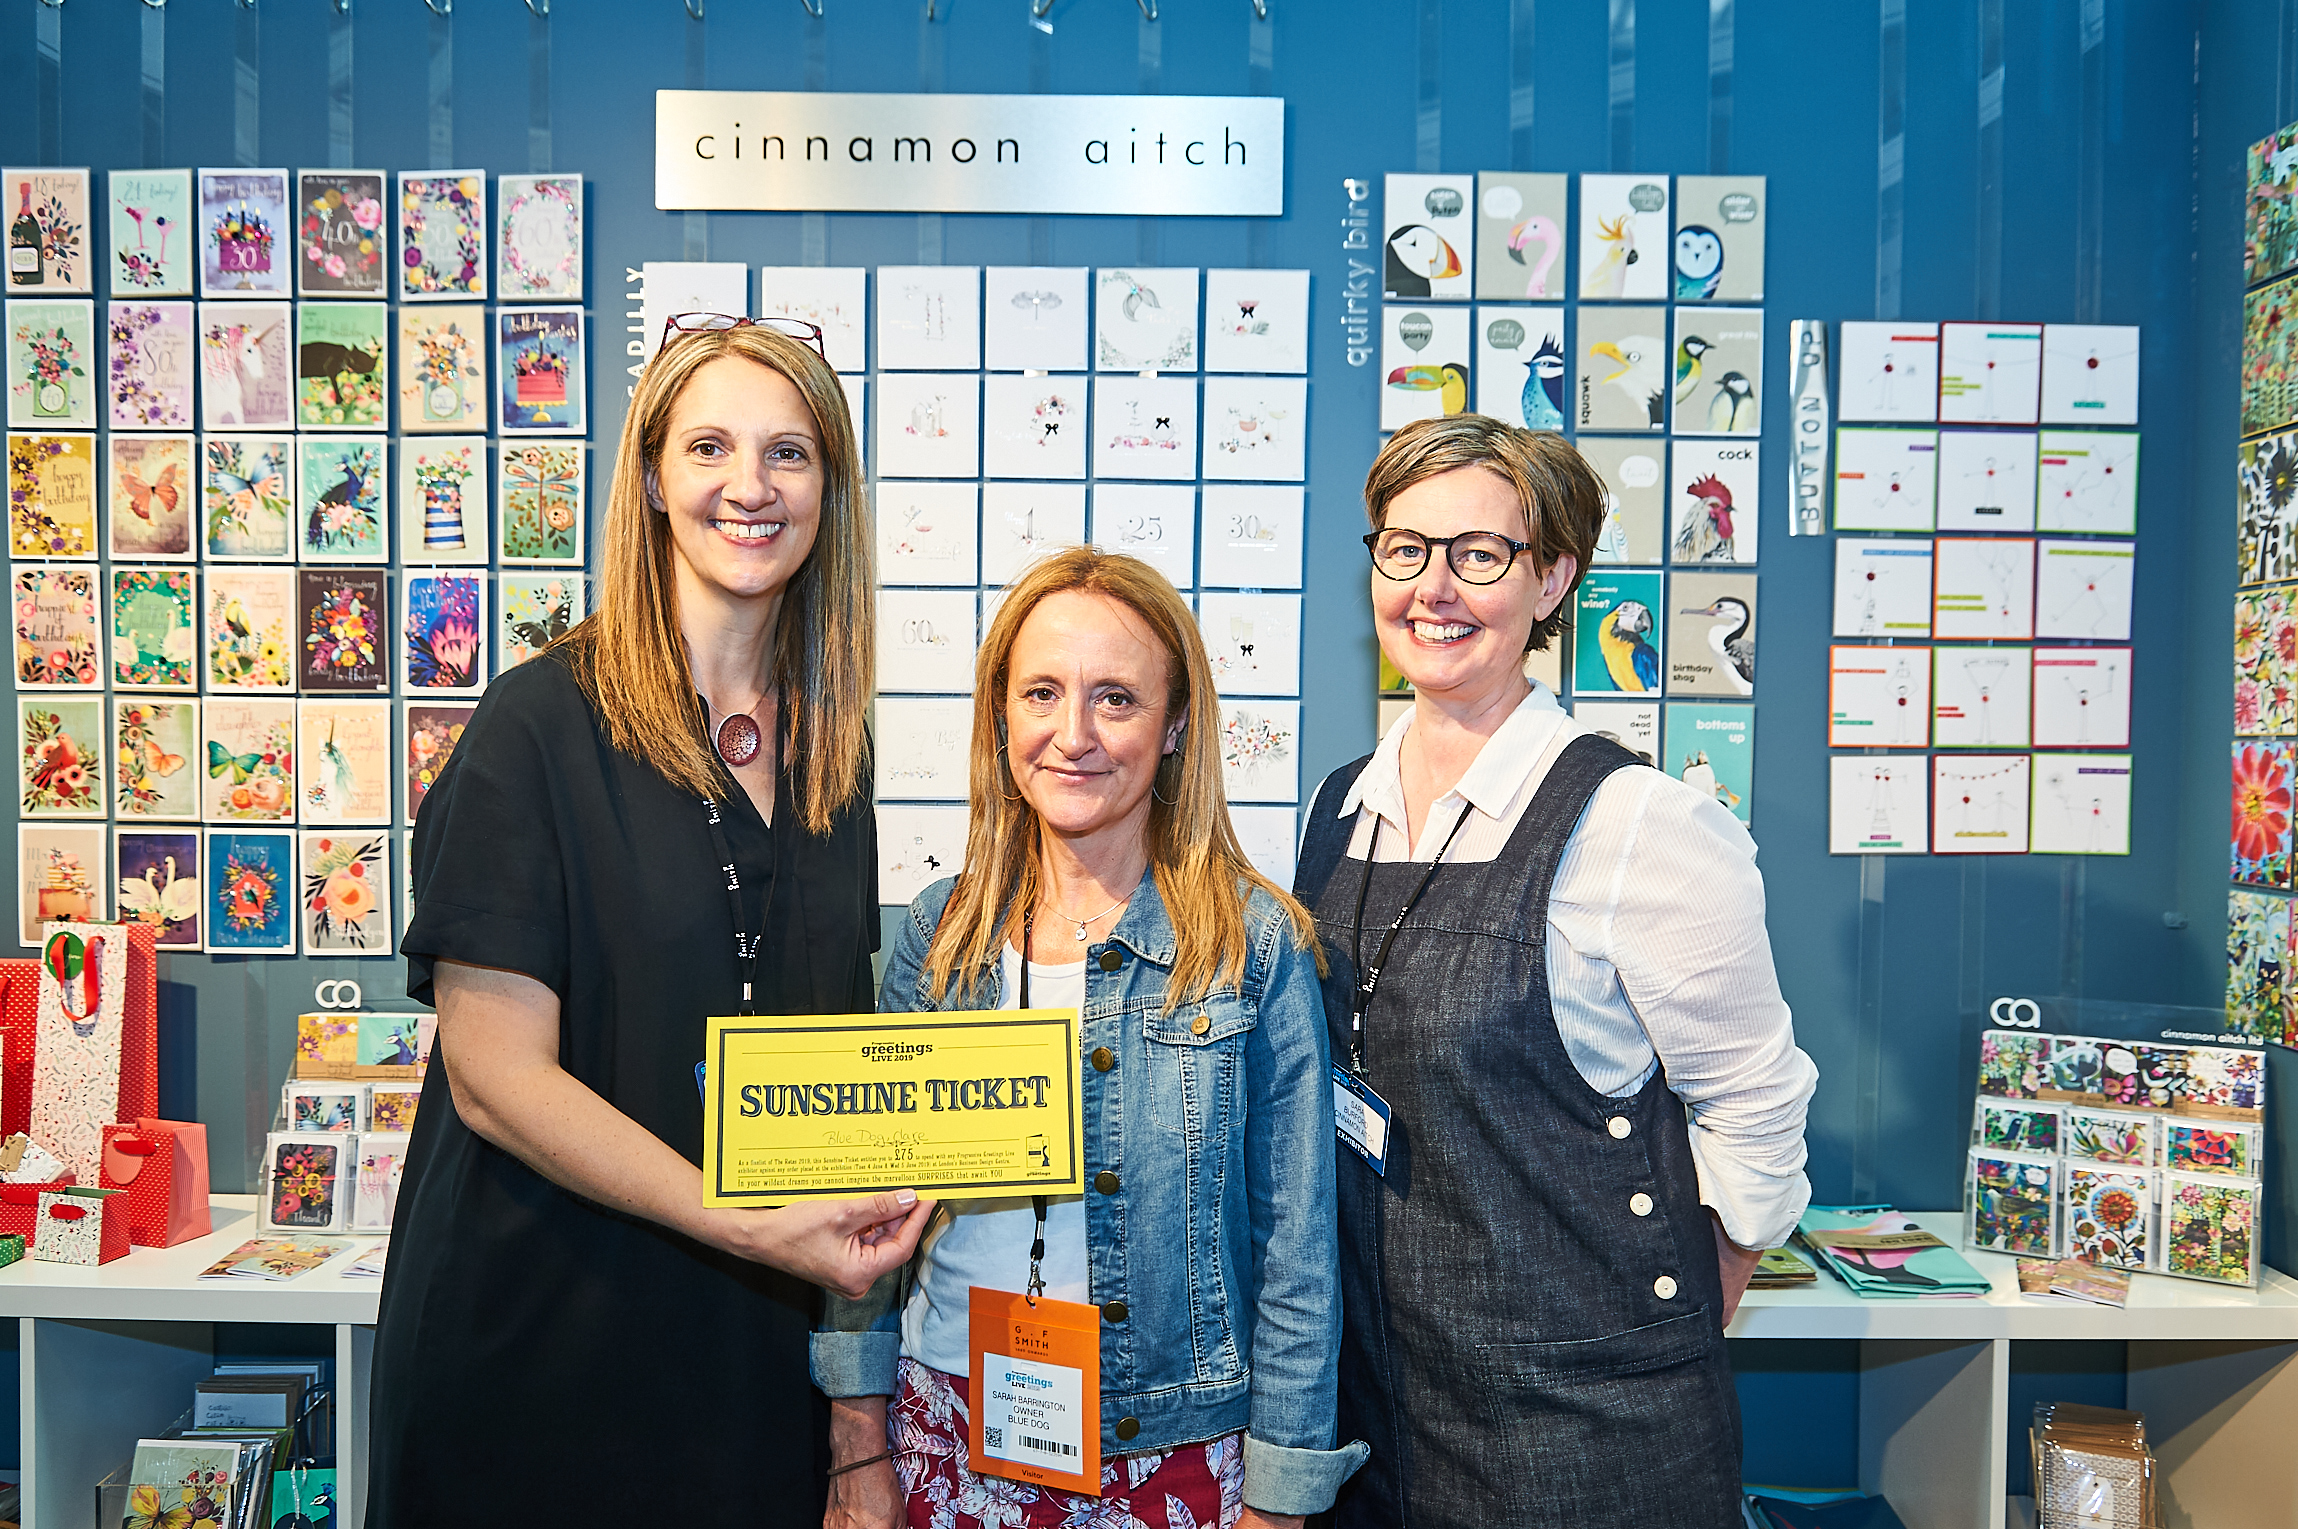 Above: (centre) Sarah Barrington, owner of Blue Dog Trading was delighted to spend her Sunshine Ticket with Cinnamon Aitch, one of her longest standing card suppliers.